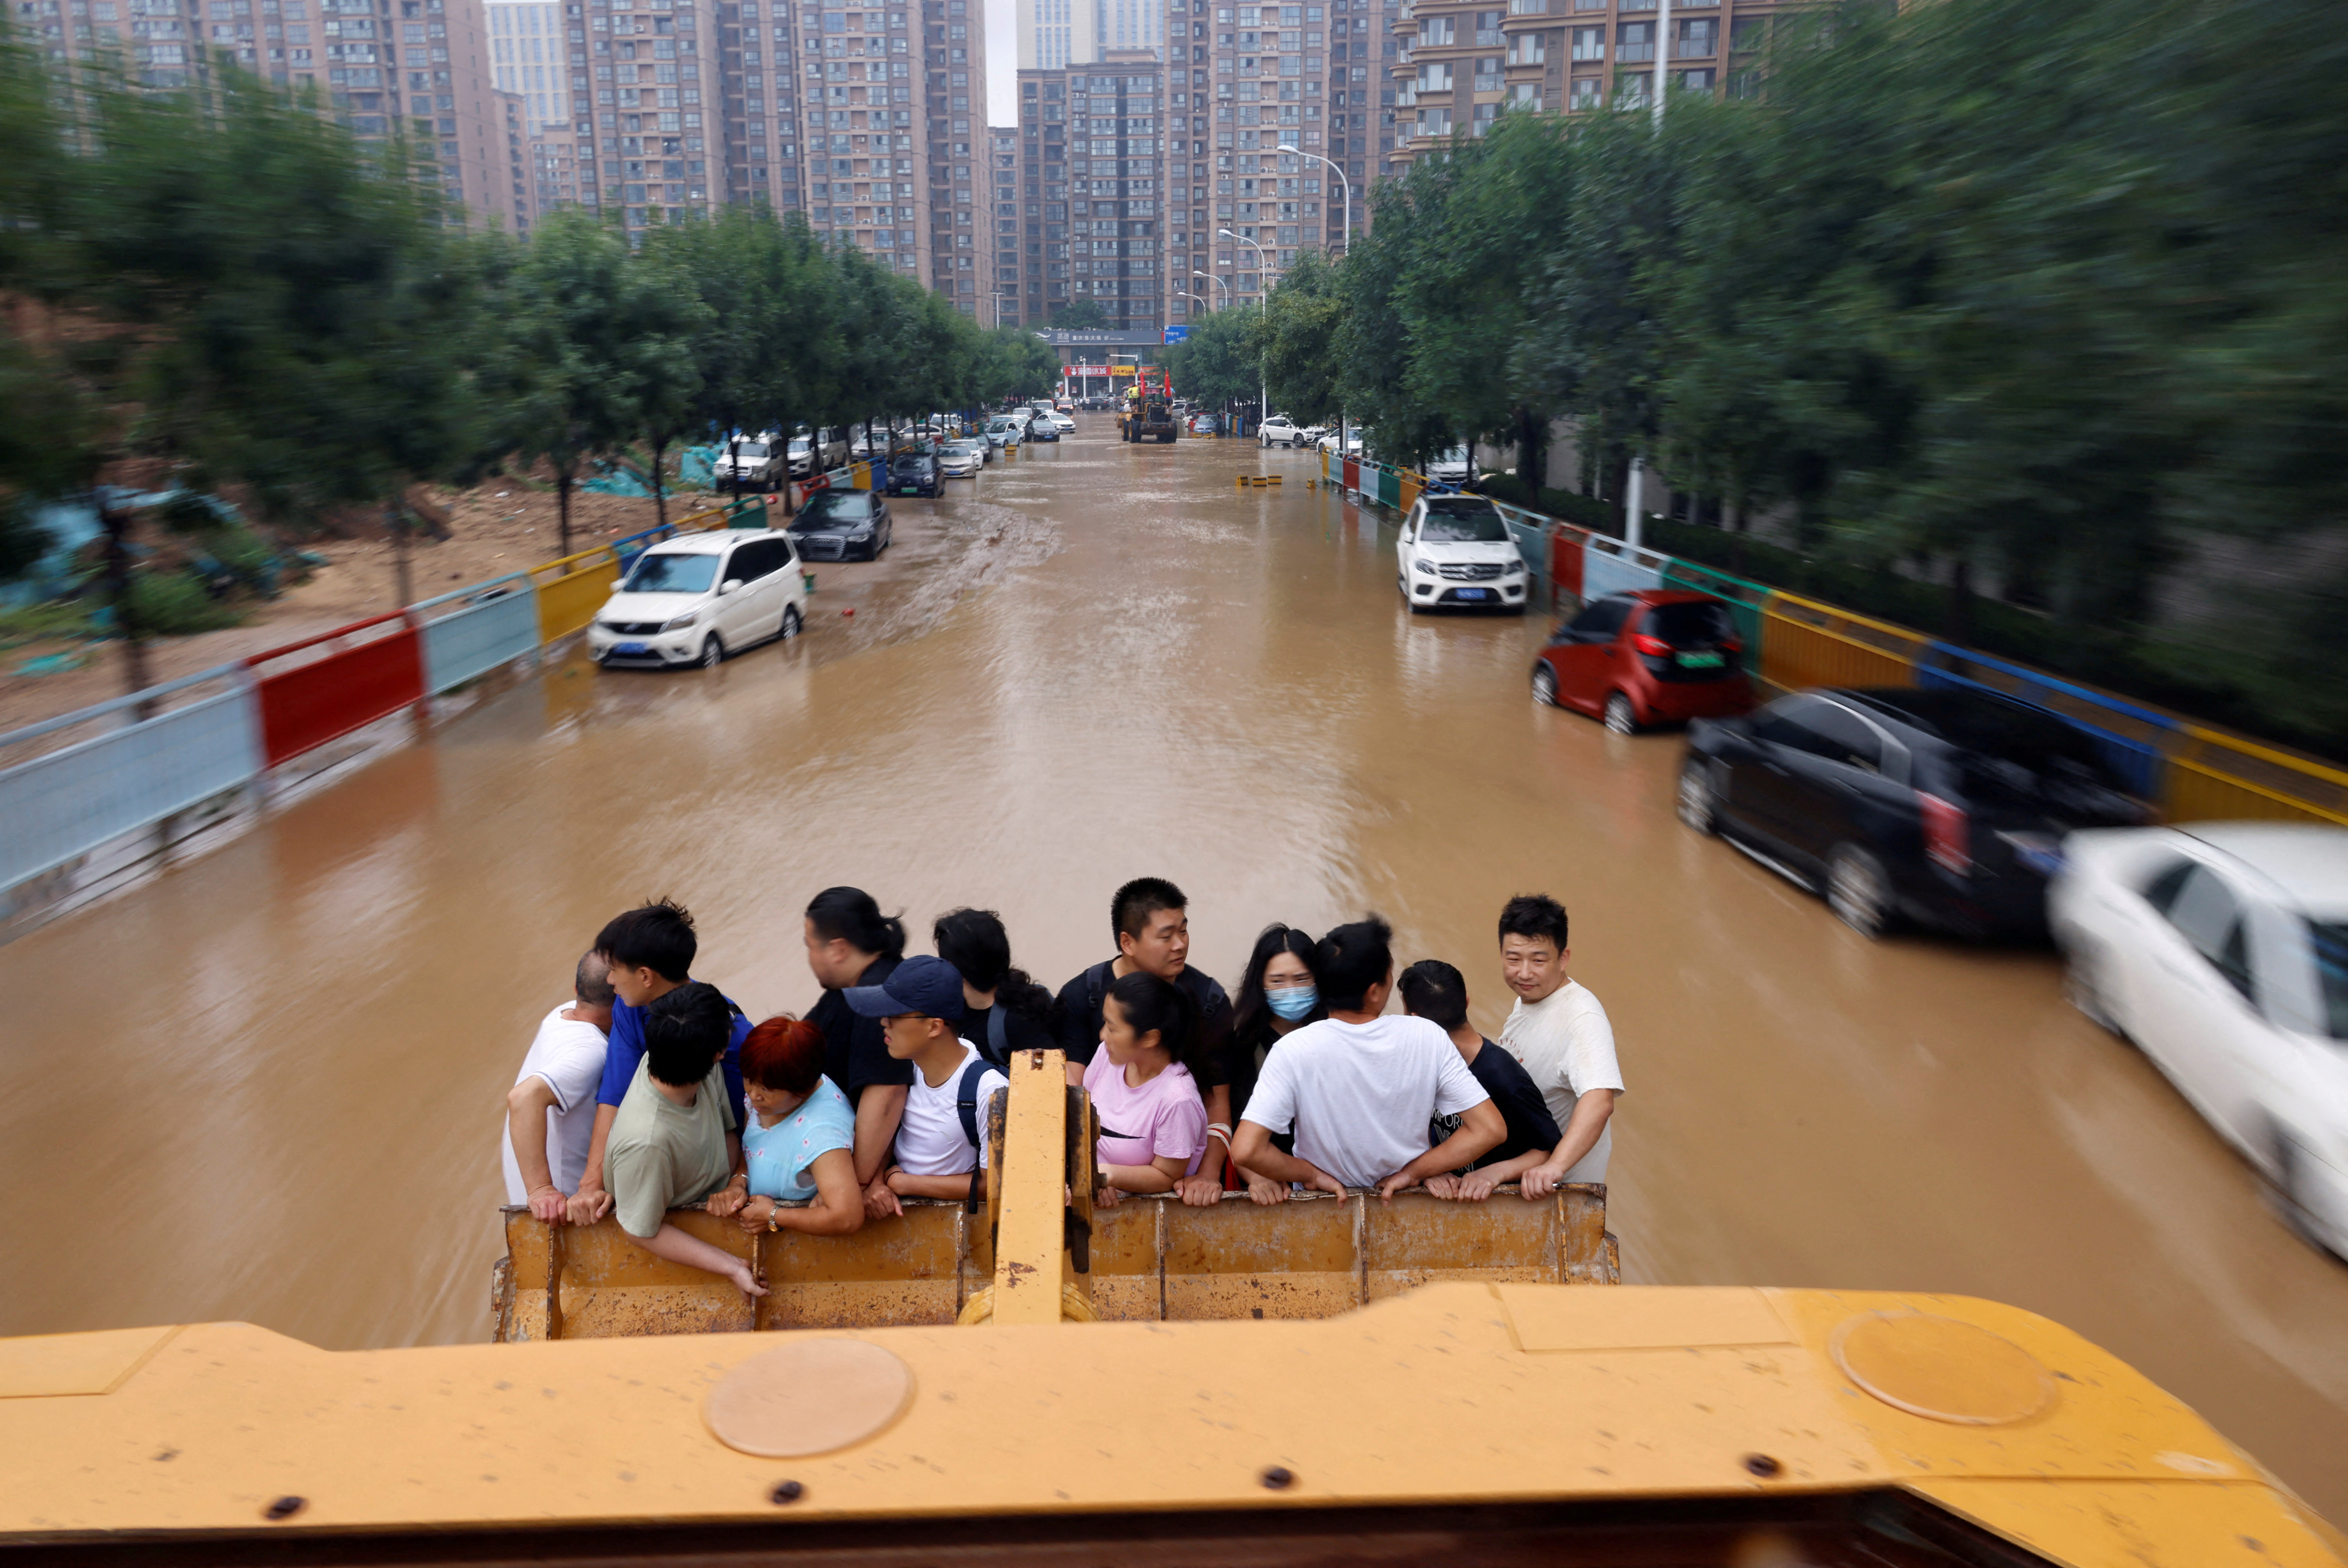 People ride on a front loader as they make their way through a flooded road following heavy rainfall in Zhengzhou